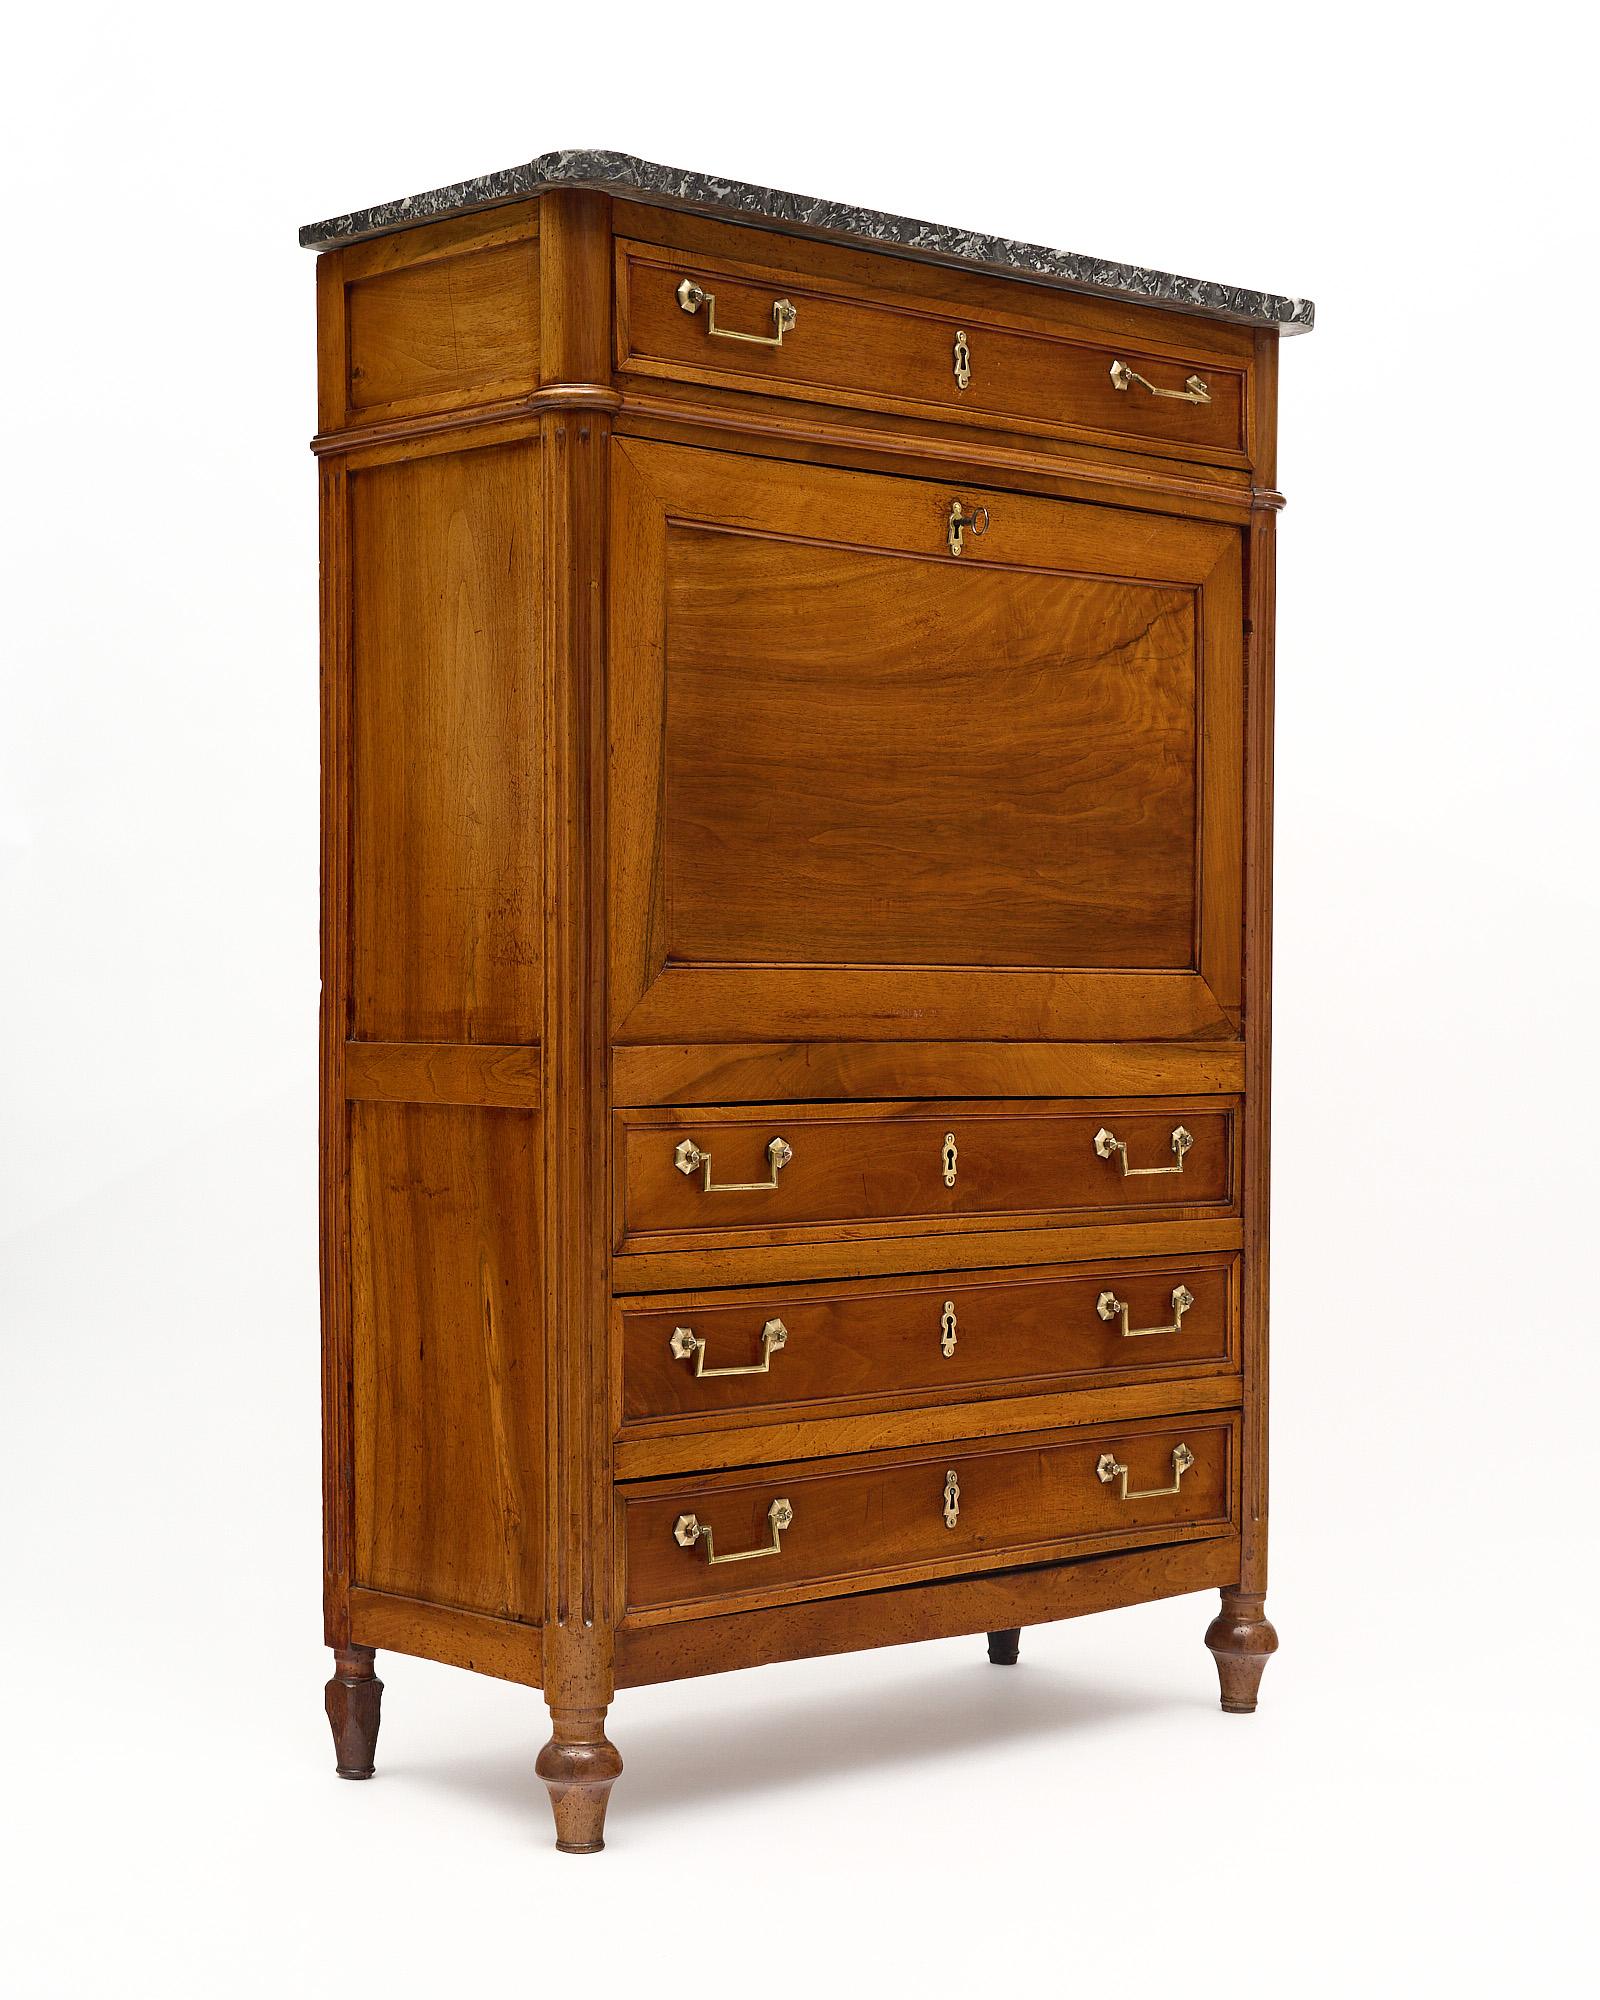 Secretary, drop front desk, from France in the Louis XVI style. This cabinet is made of blond walnut and has been finished in a lustrous museum quality French polish. There are four dovetailed drawers all featuring gilt brass hardware. The drop